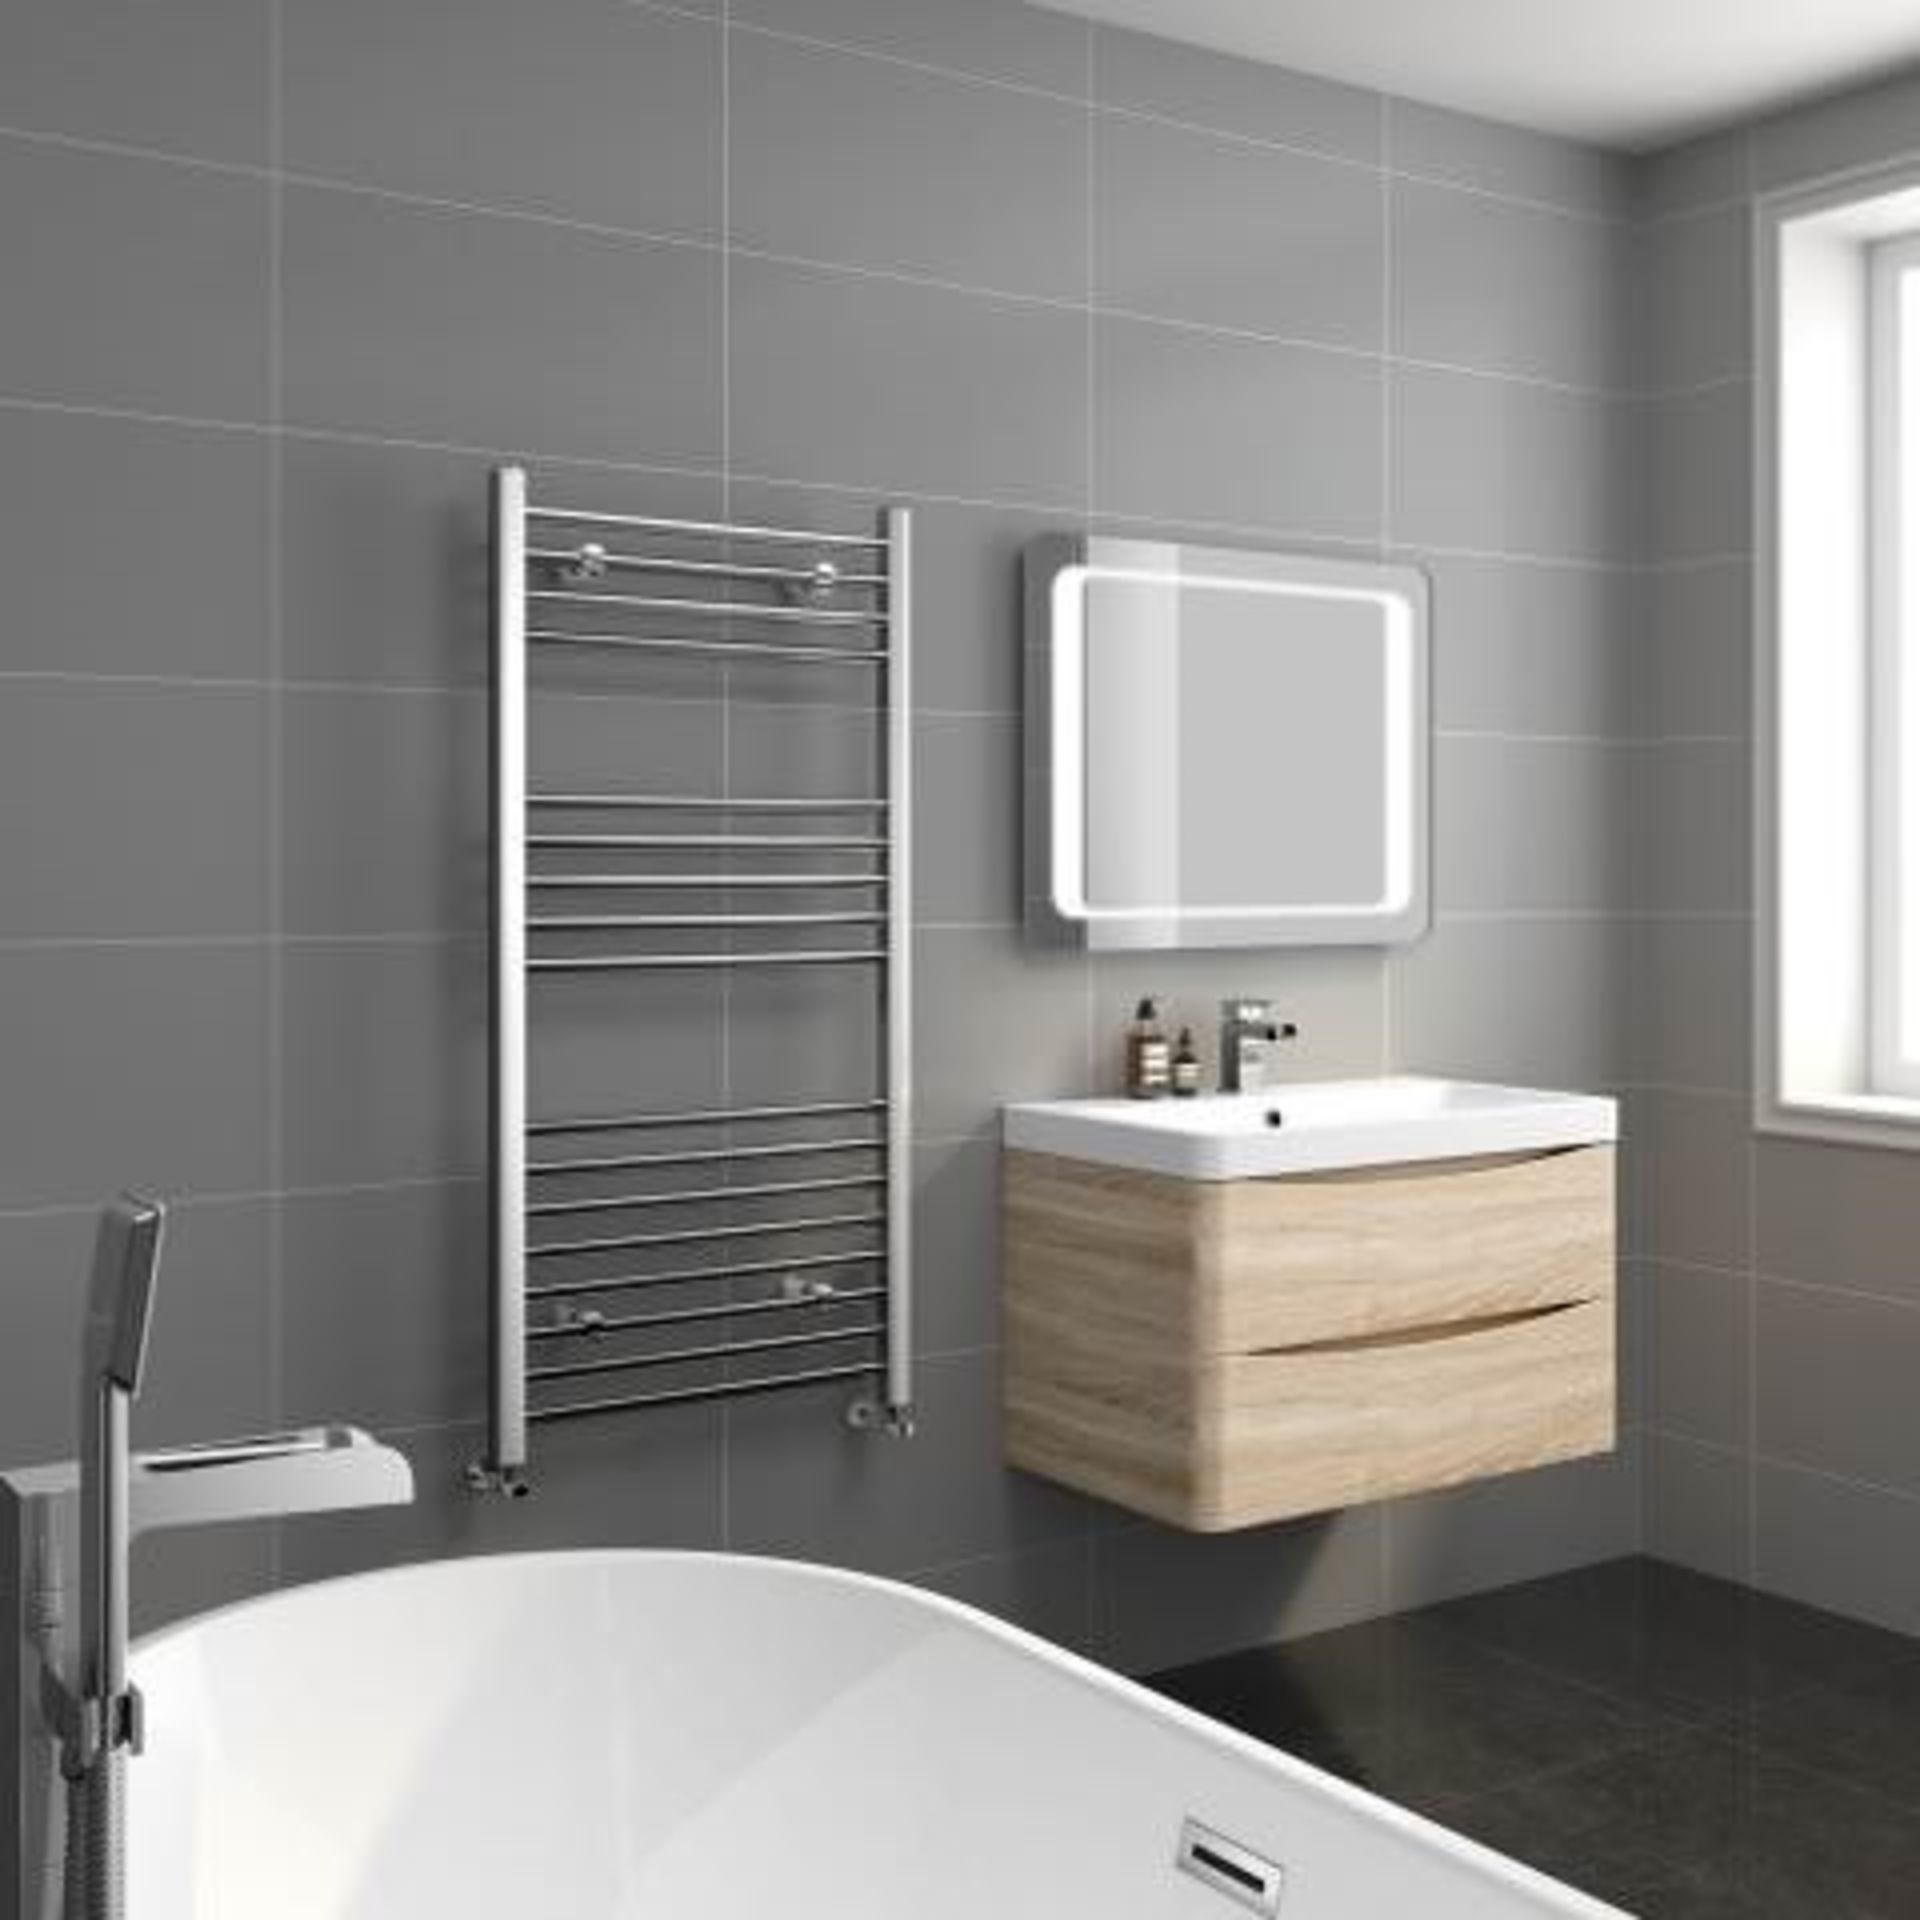 1200x600mm - 20mm Tubes - Chrome Heated Straight Rail Ladder Towel Radiator. RRP £219.99.The ... - Image 2 of 2